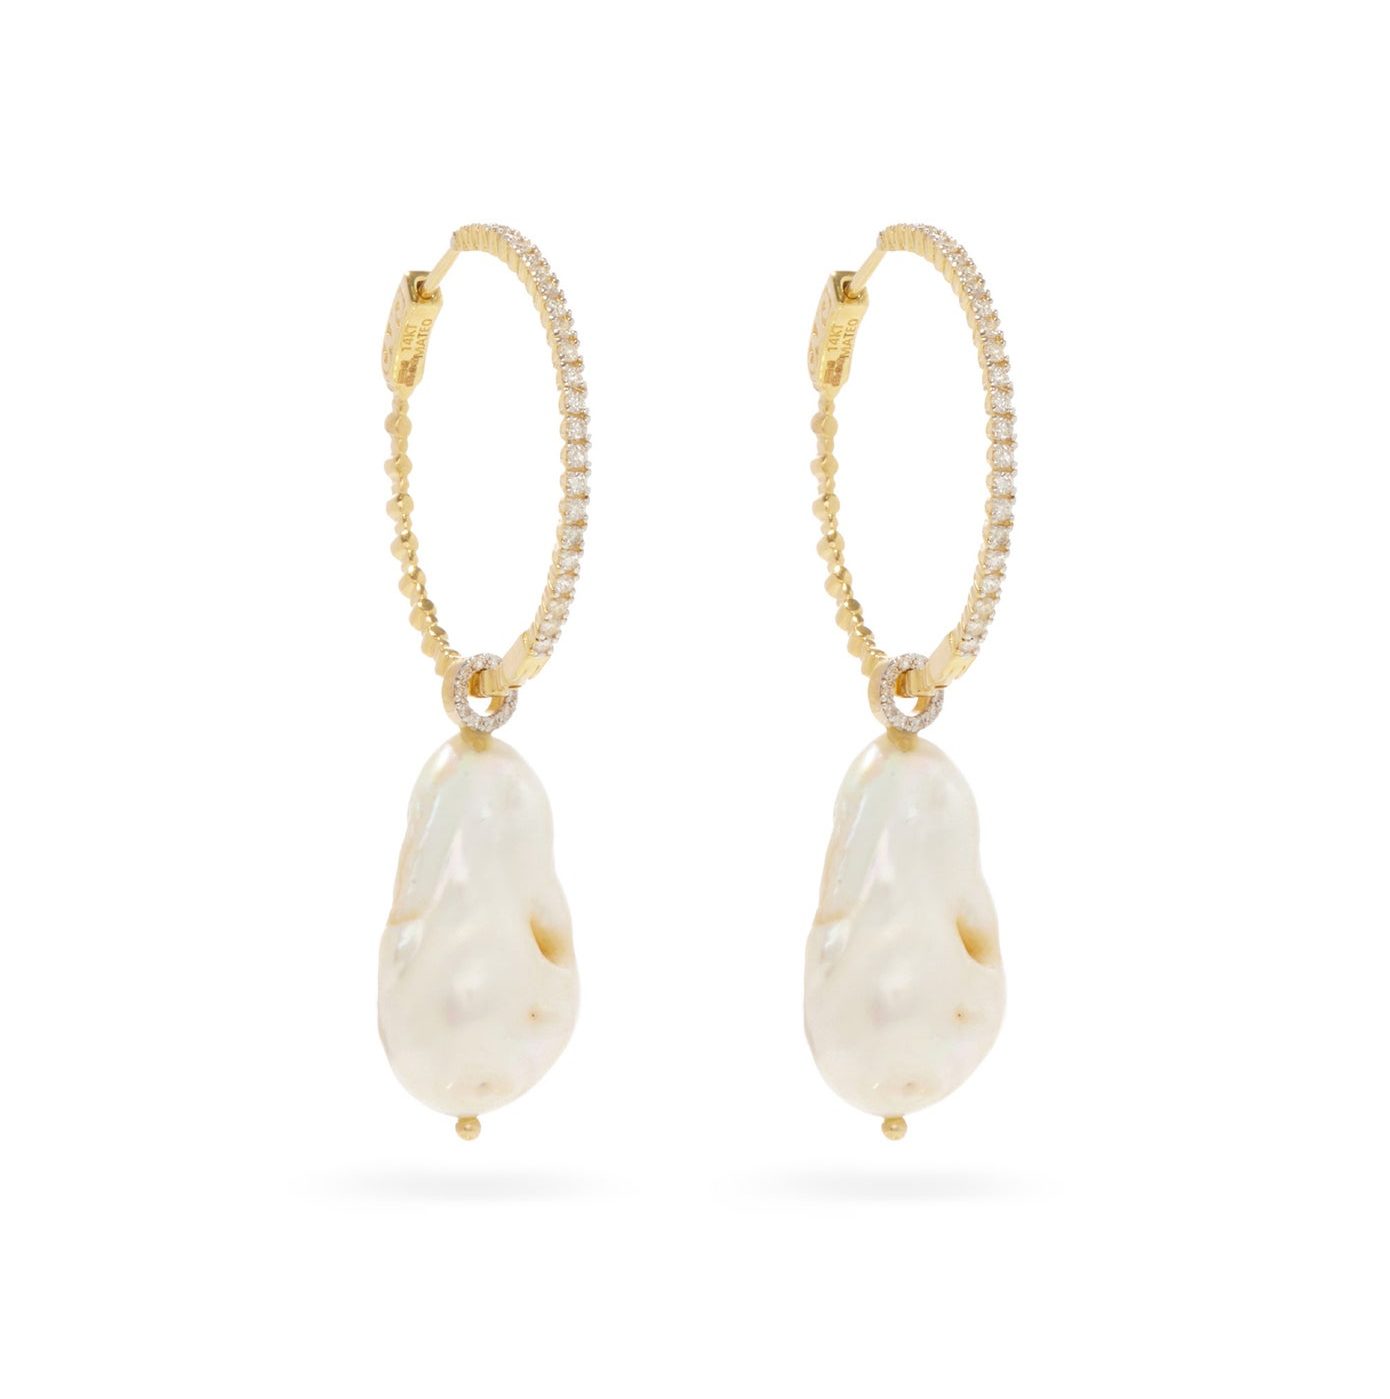 Diamond, Pearl, and 14kt Gold Earrings